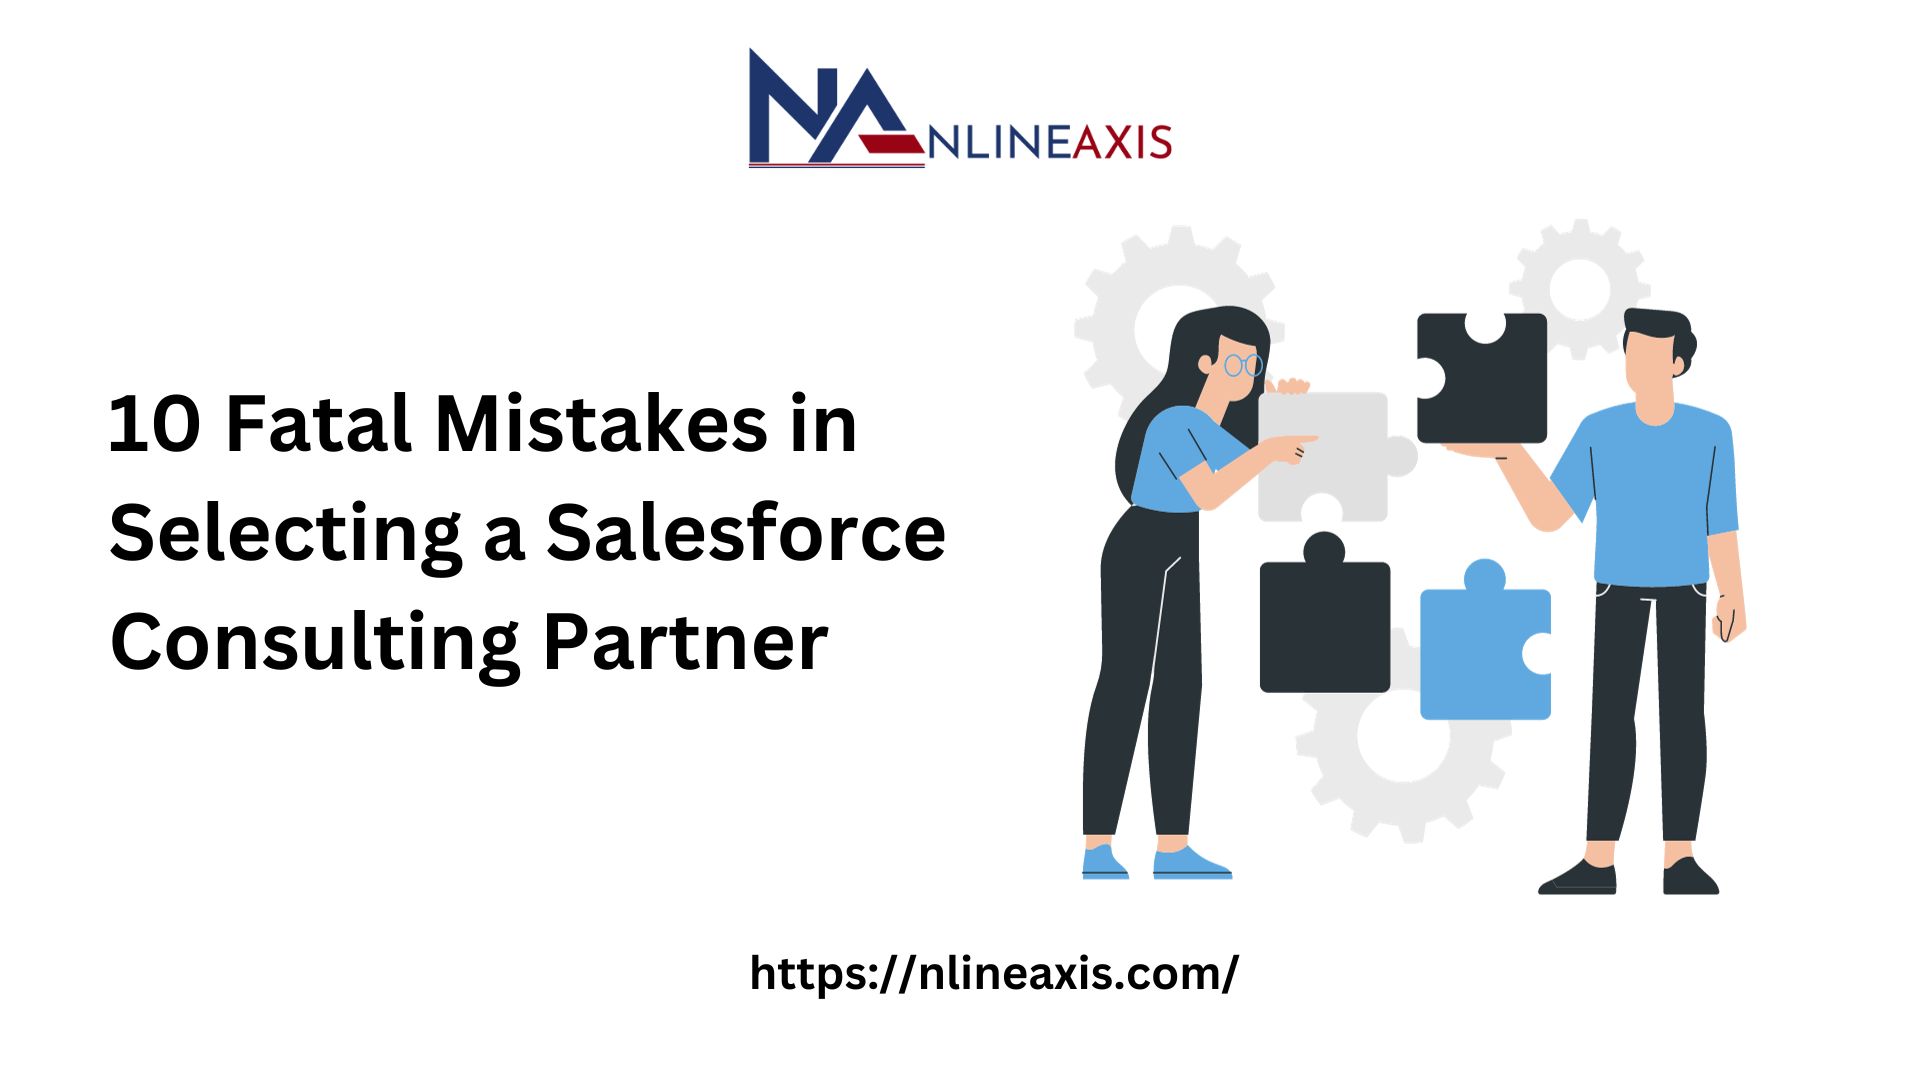 10 Fatal Mistakes in Selecting a Salesforce Consulting Partner